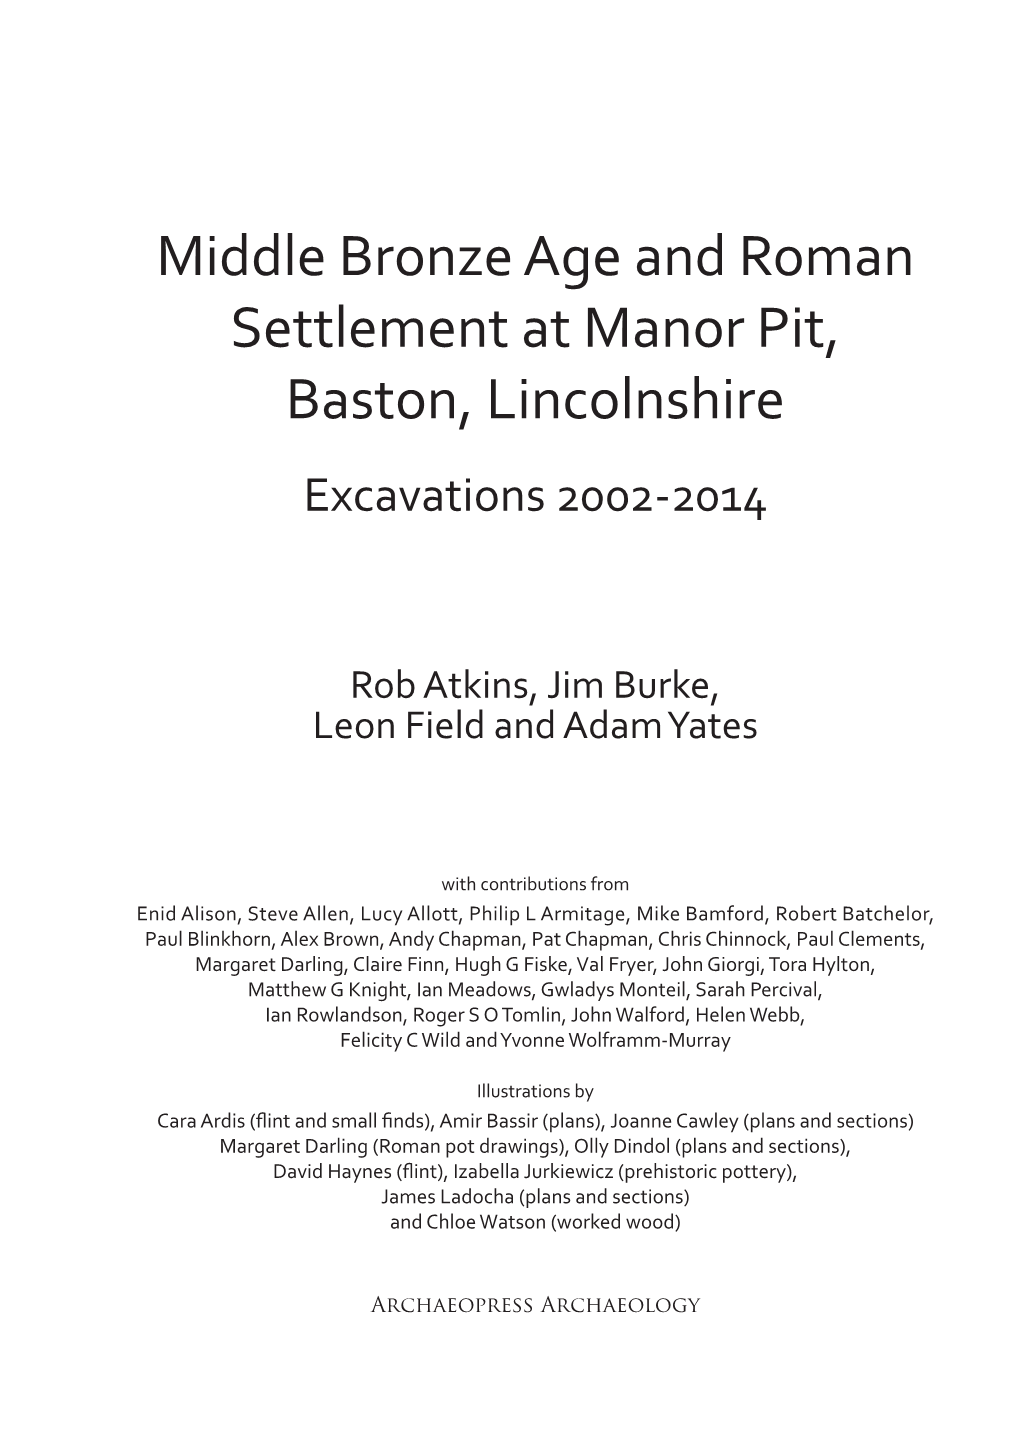 Middle Bronze Age and Roman Settlement at Manor Pit, Baston, Lincolnshire Excavations 2002-2014